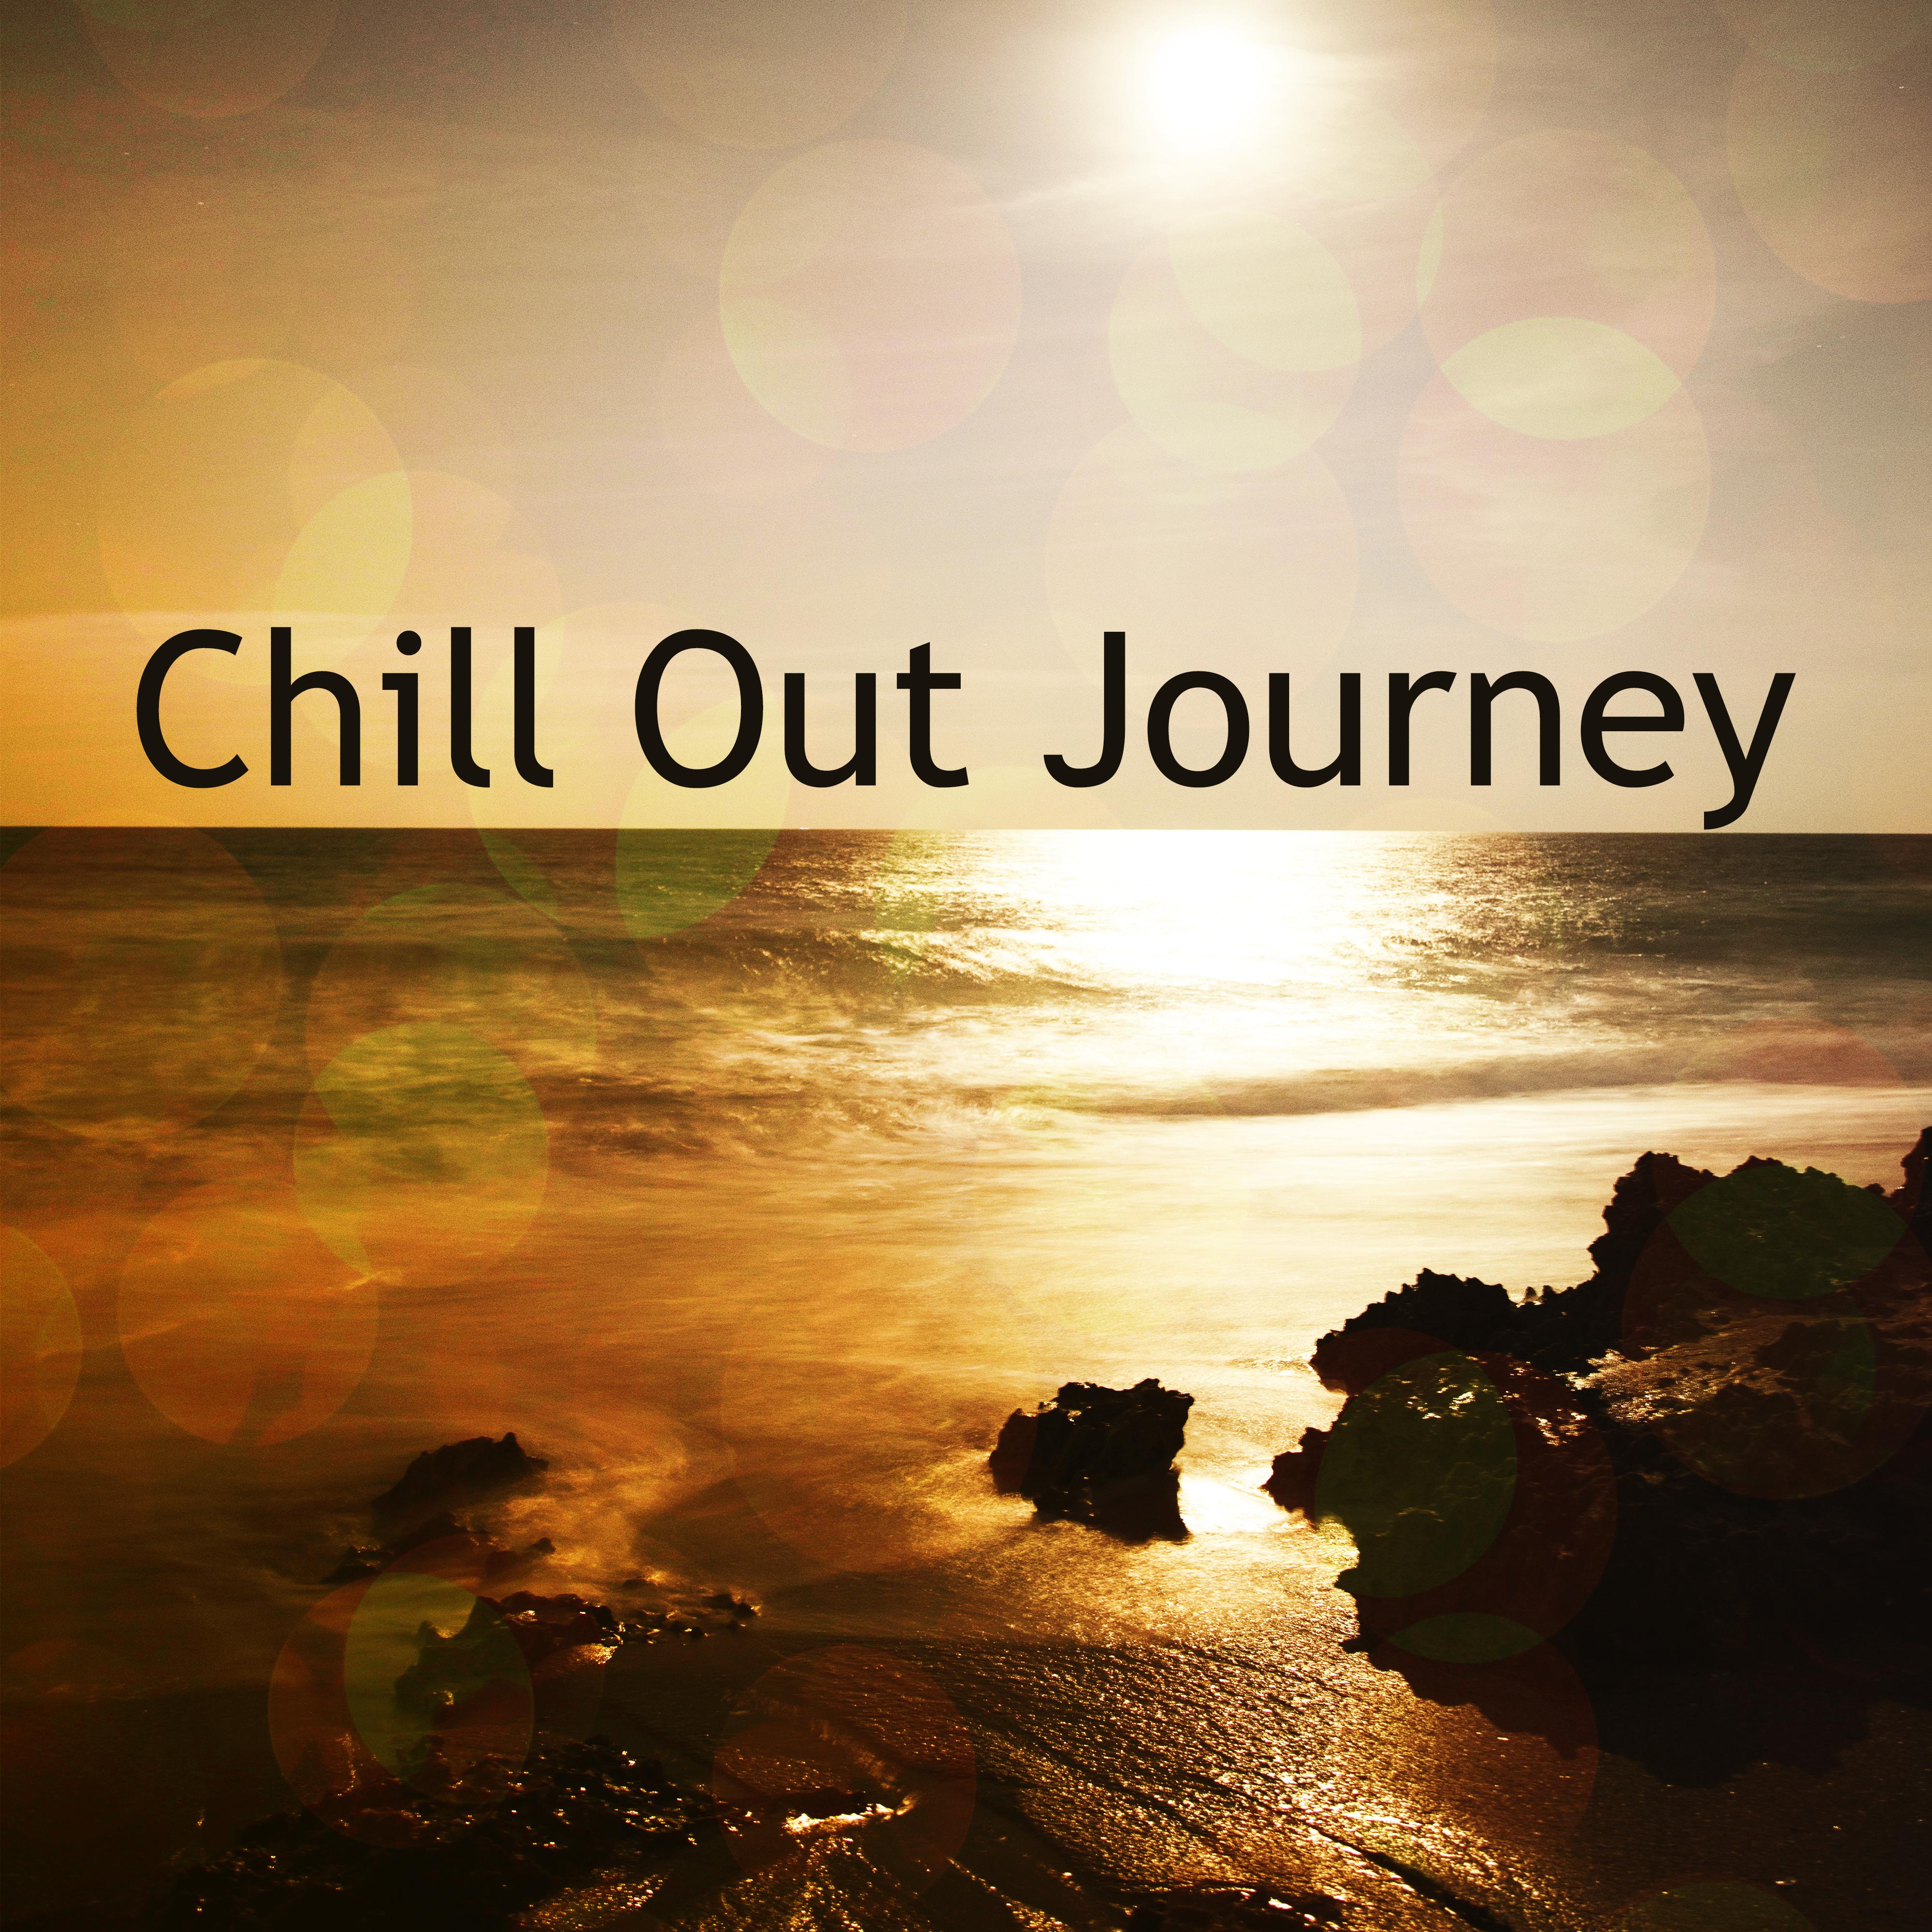 Chill Out Journey  Summer Music, Chill Out Songs, Chill Out Ibiza, Hotel Lounge, Deep Beats